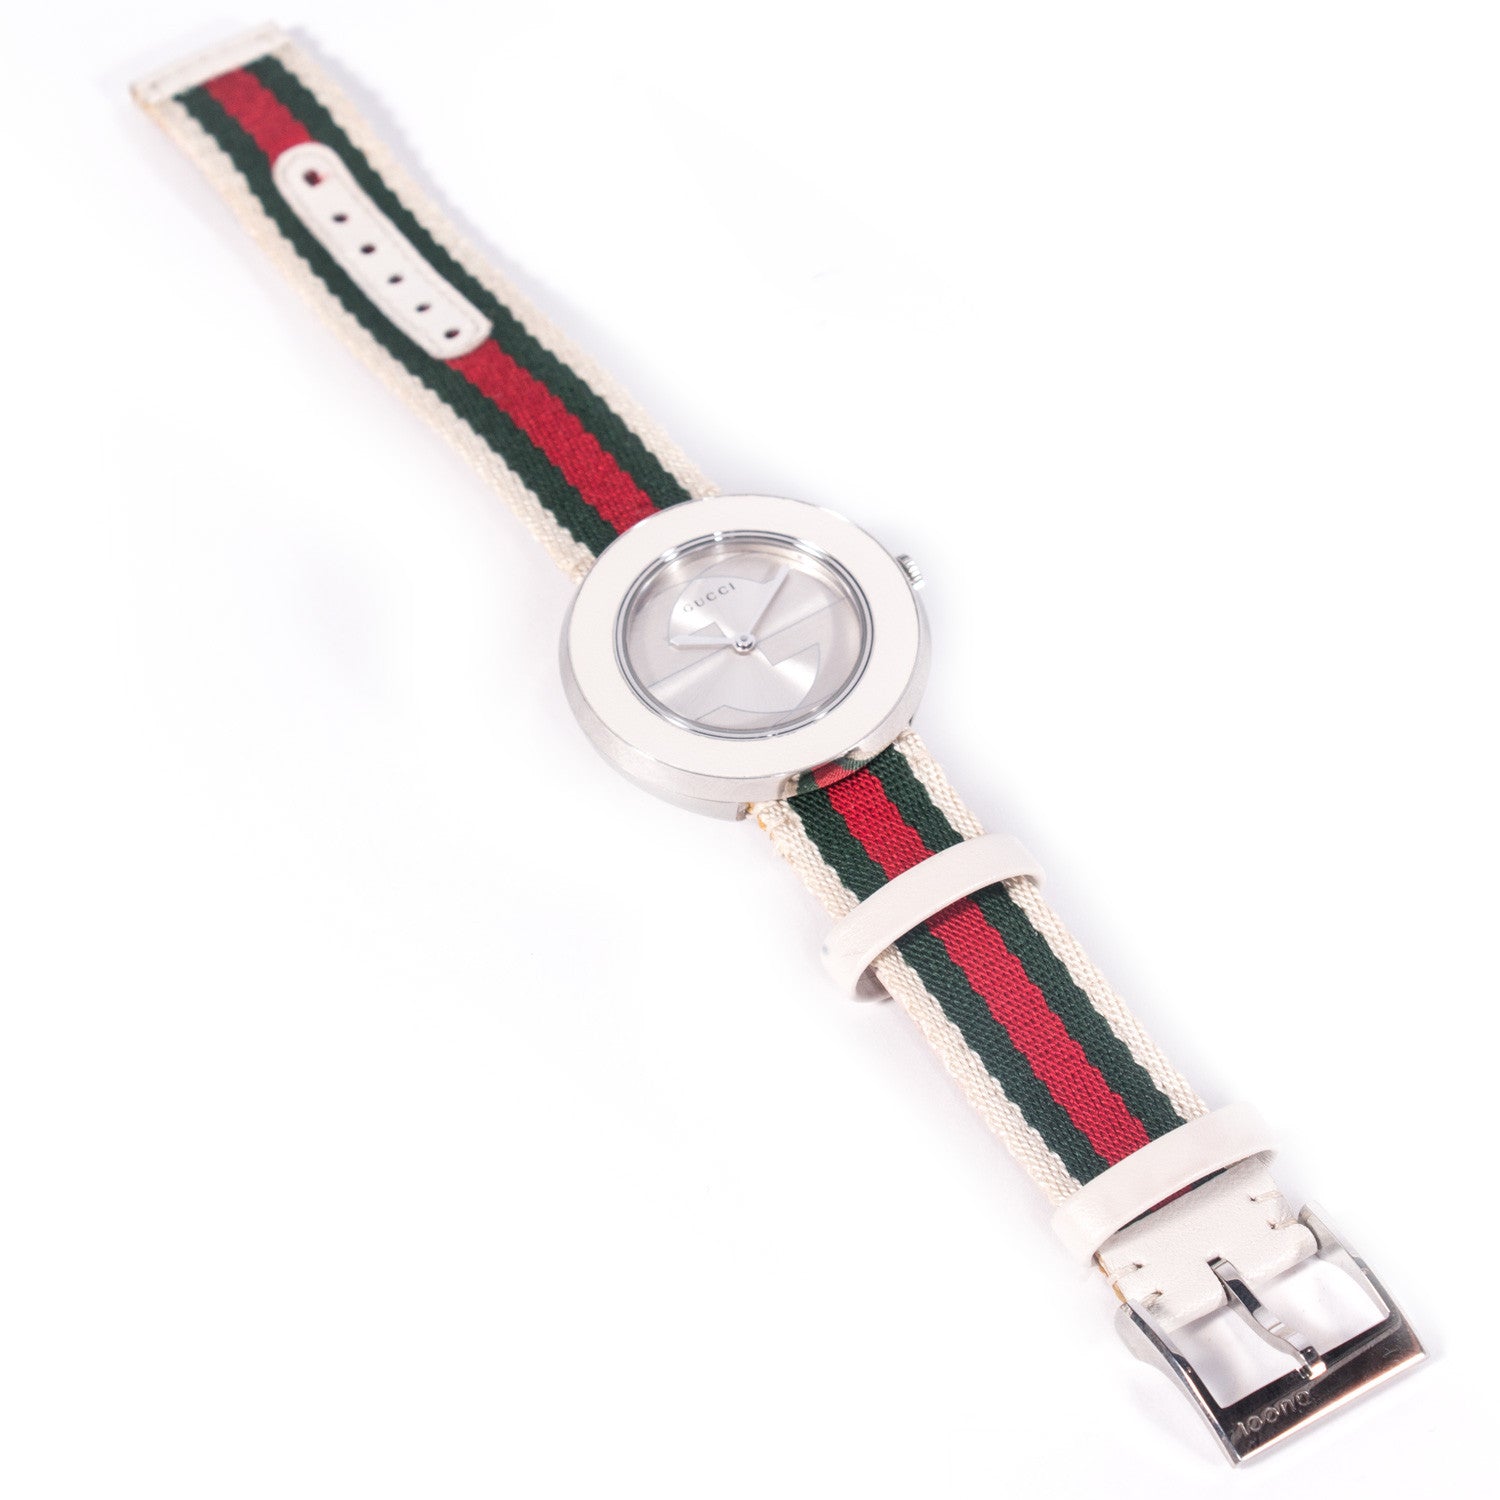 Shop authentic Gucci U-Play Medium Watch at revogue for just USD 407.00